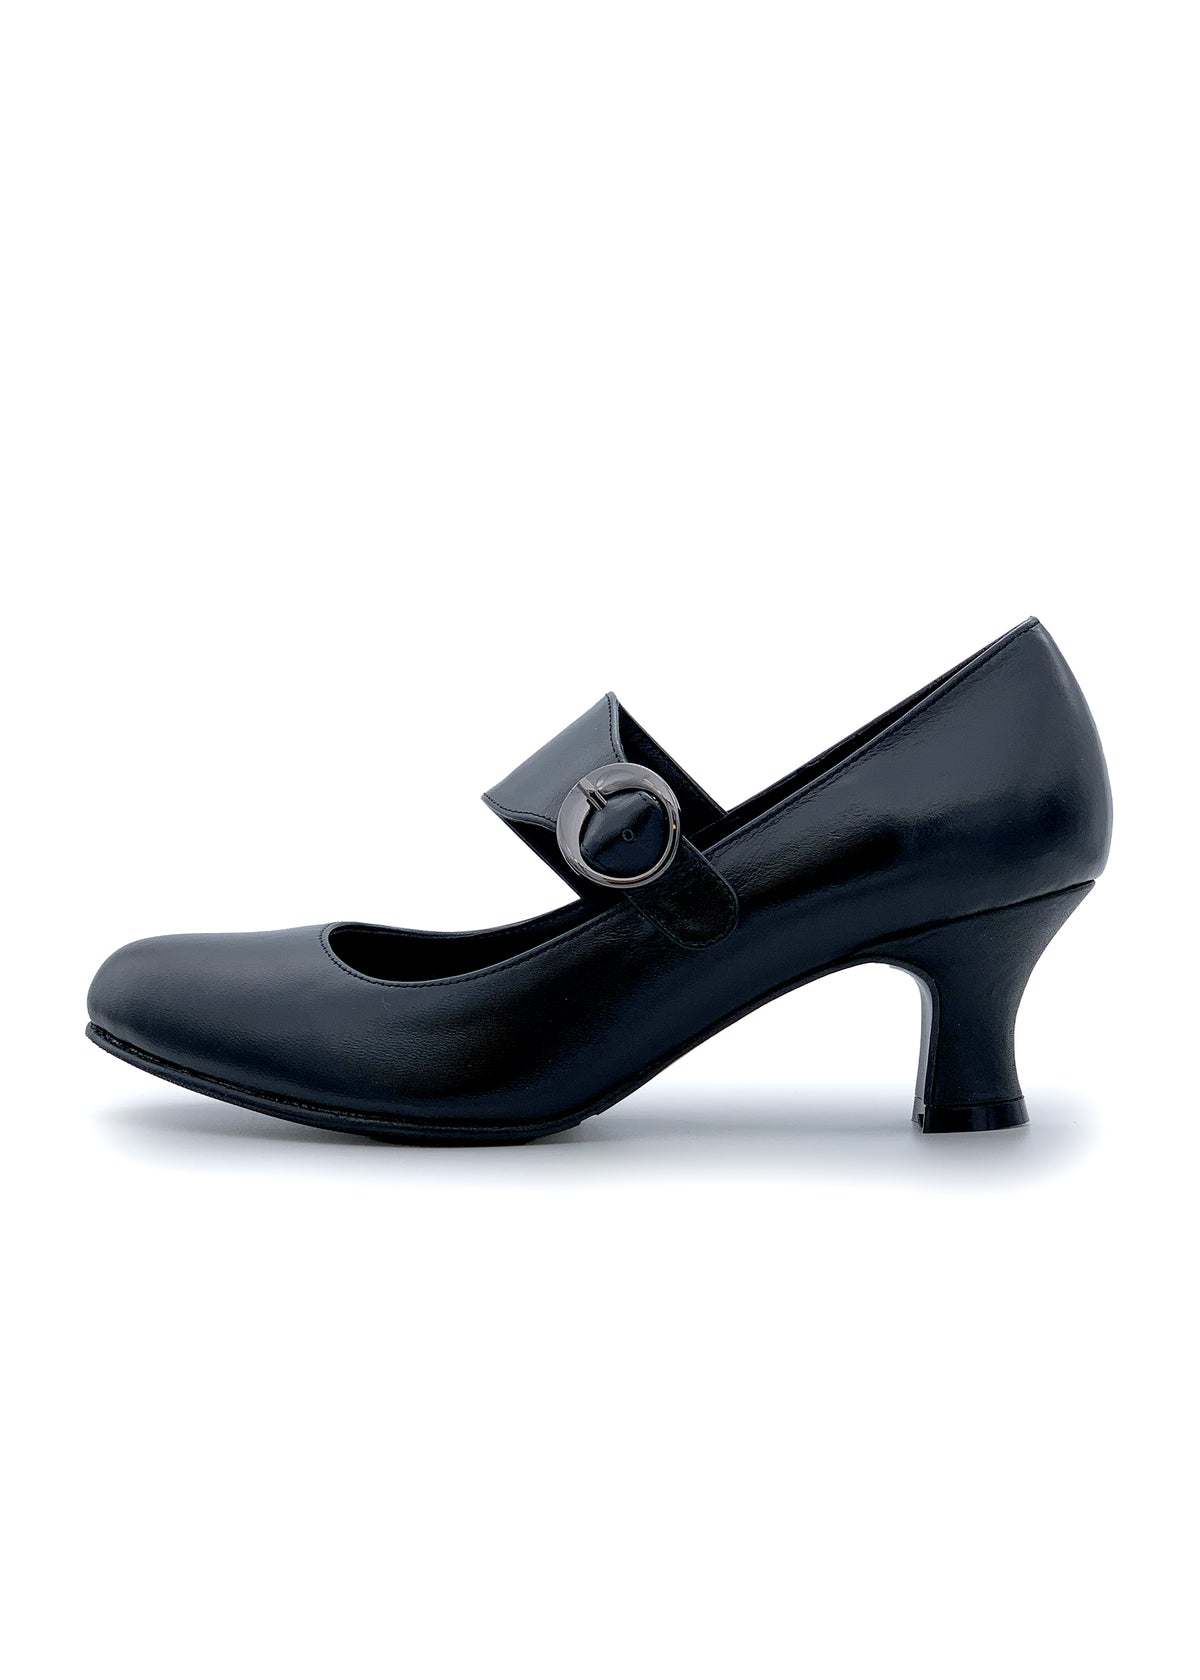 Open toe shoes with wide buckle strap - black leather